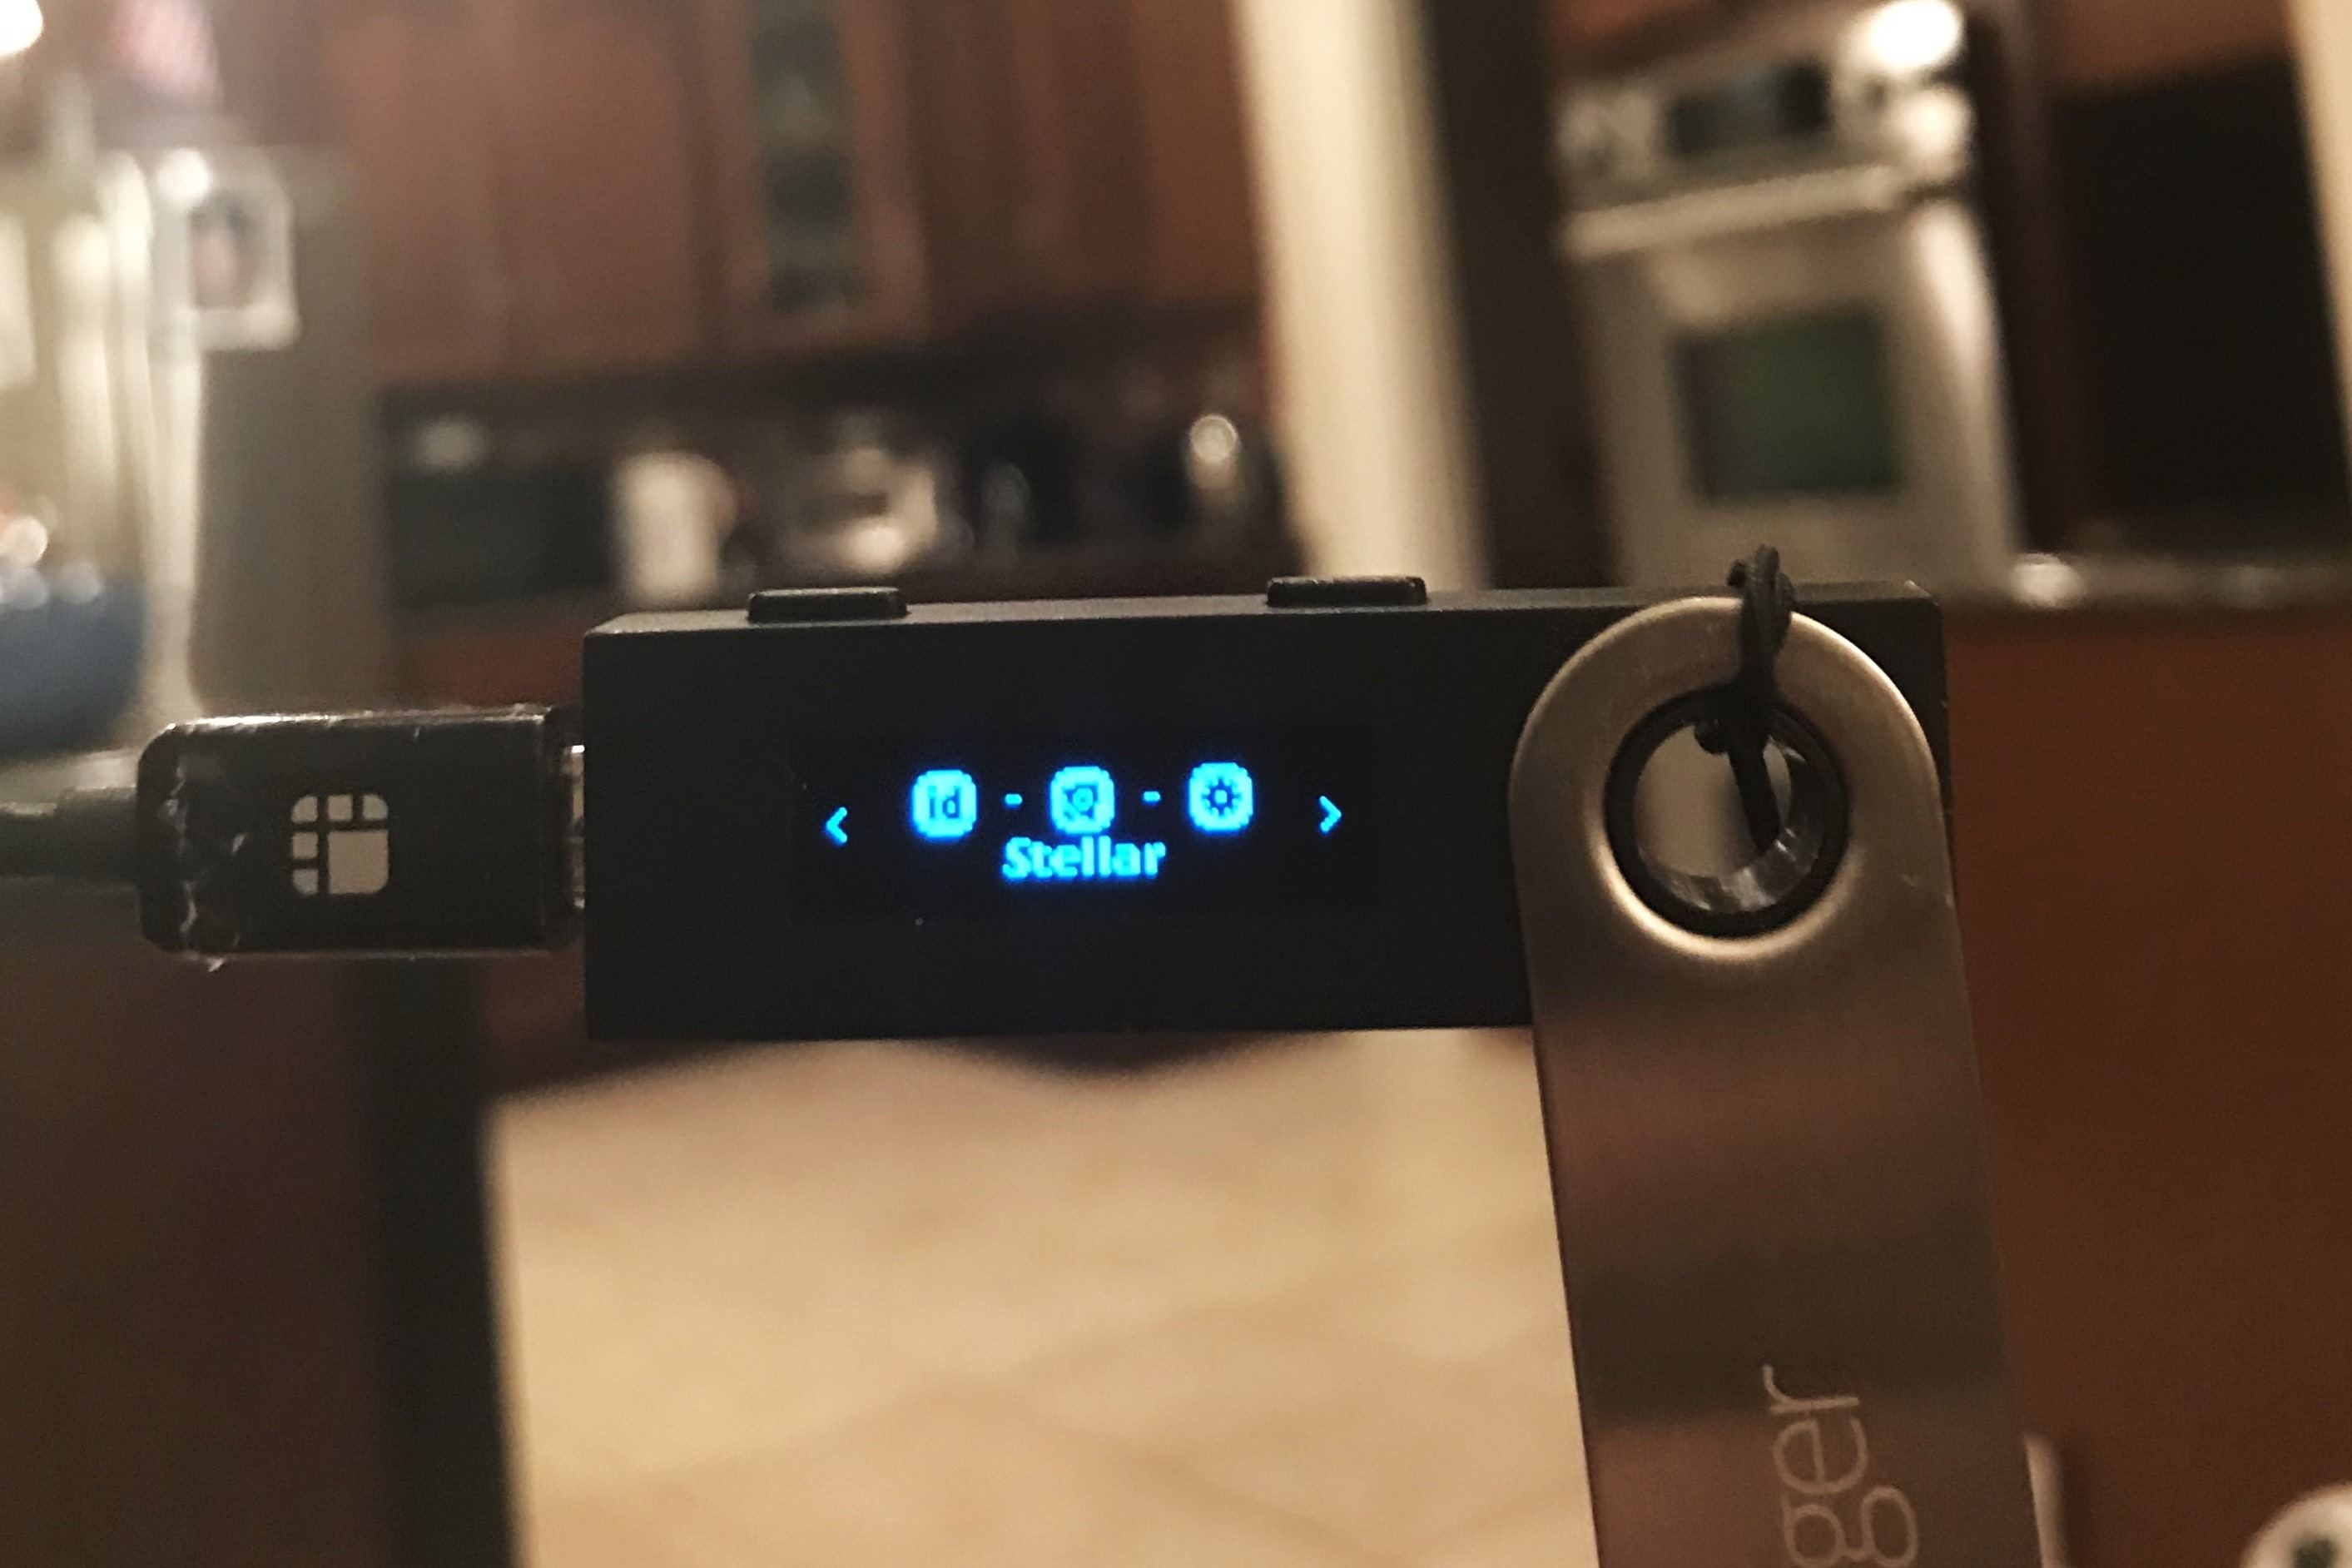 How To Add Stellar To Ledger Nano S